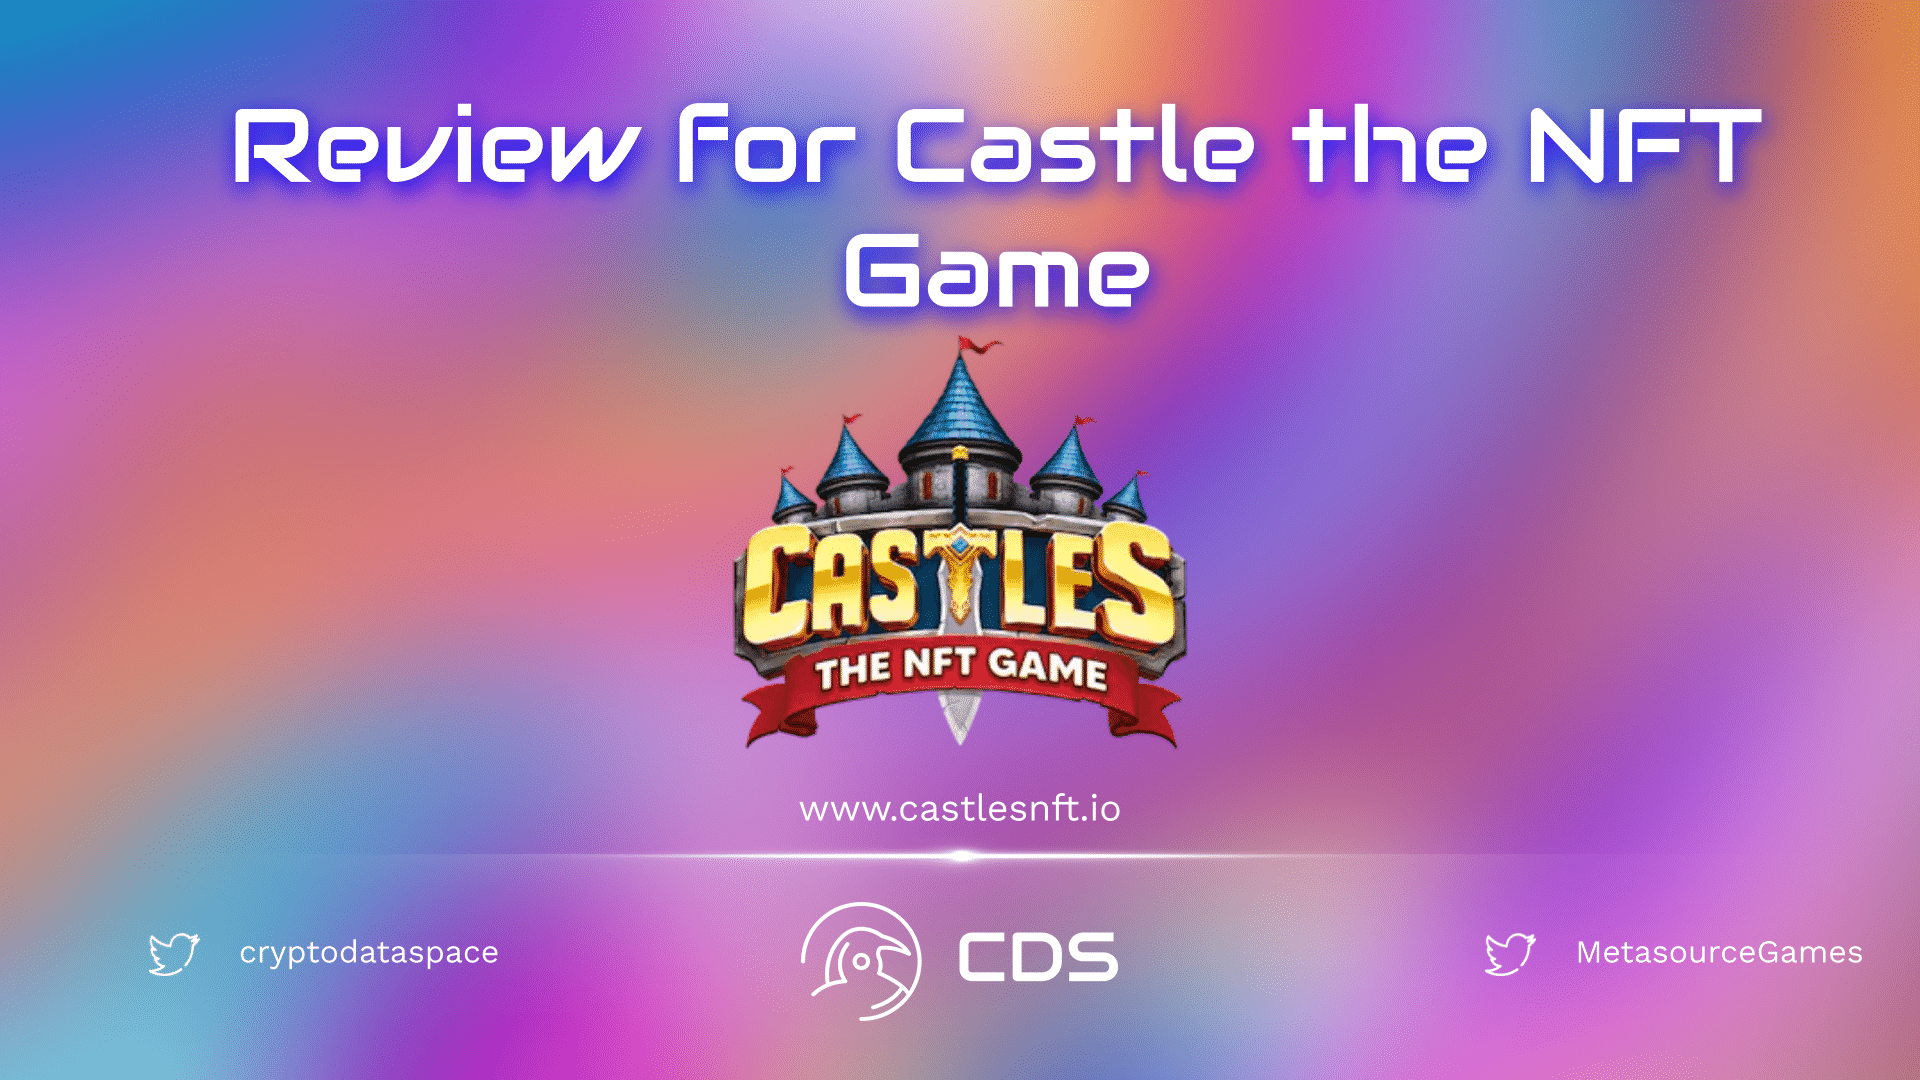 Review for Castle the NFT Game